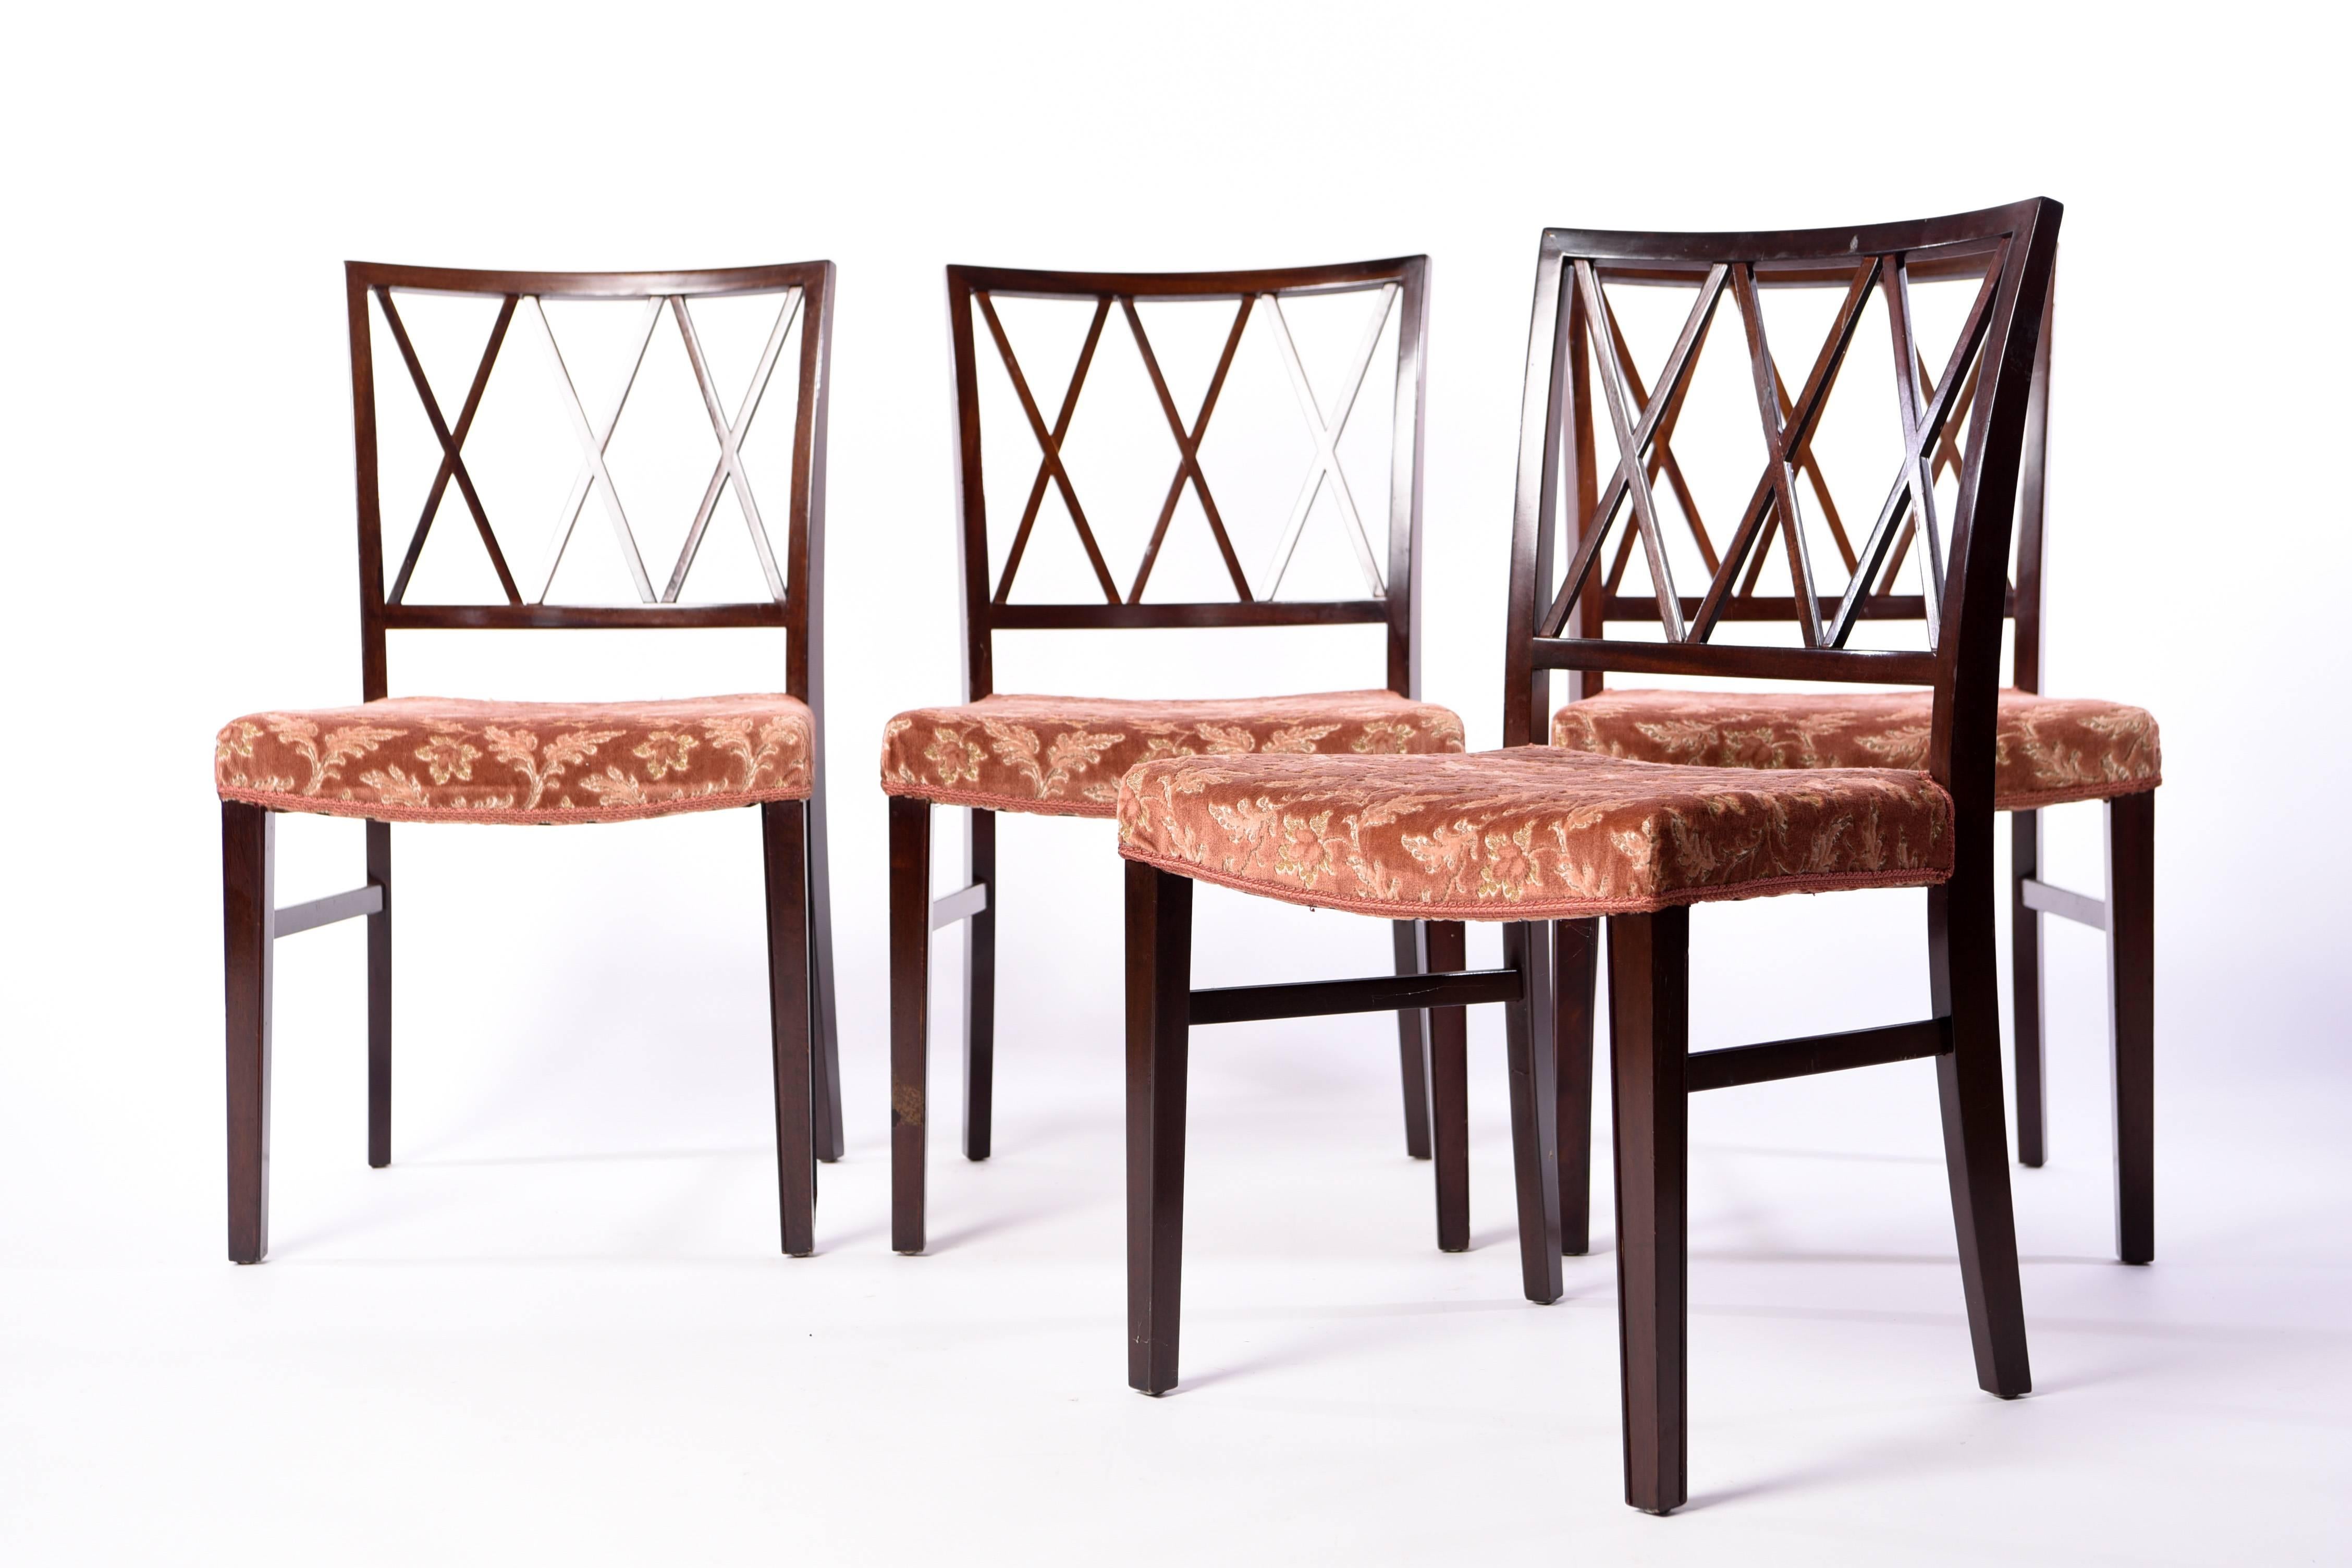 This set of four chairs was designed by Ole Wanscher in 1942, and executed by A. J. Iversen, Denmark. Featuring well crafted frames of mahogany with a more traditional design.